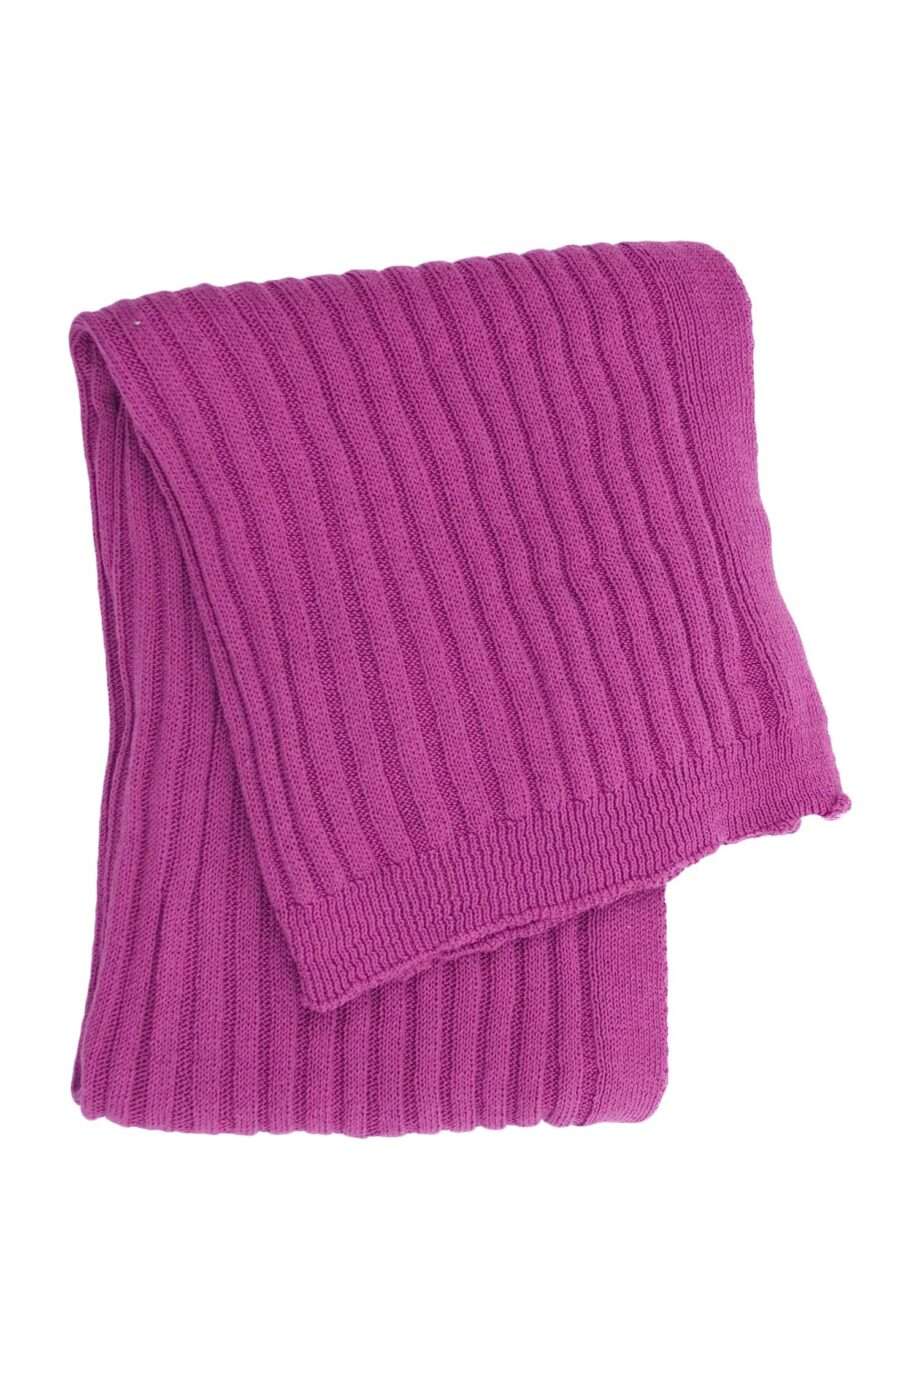 ribs small pink knitted cotton little blanket medium